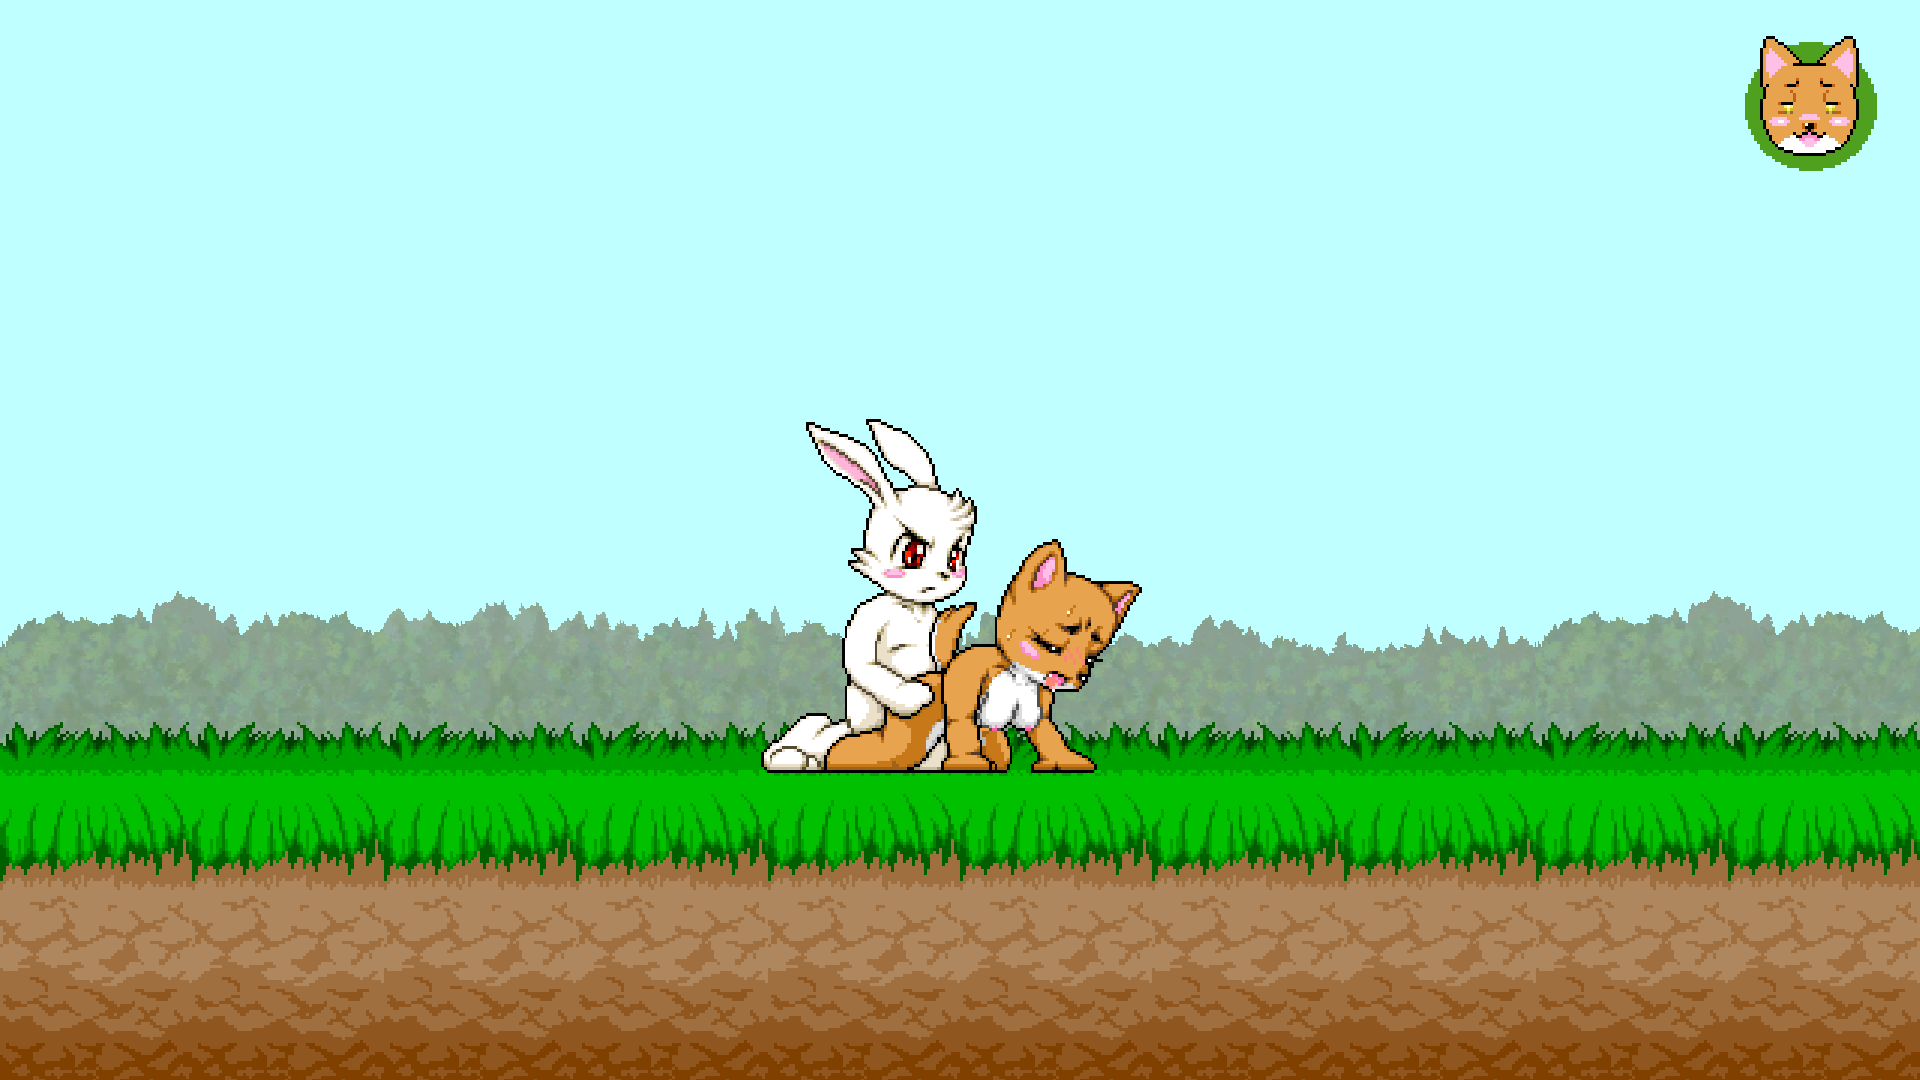 NaughtyRabbitAnimations - free porn game download, adult nsfw games for  free - xplay.me